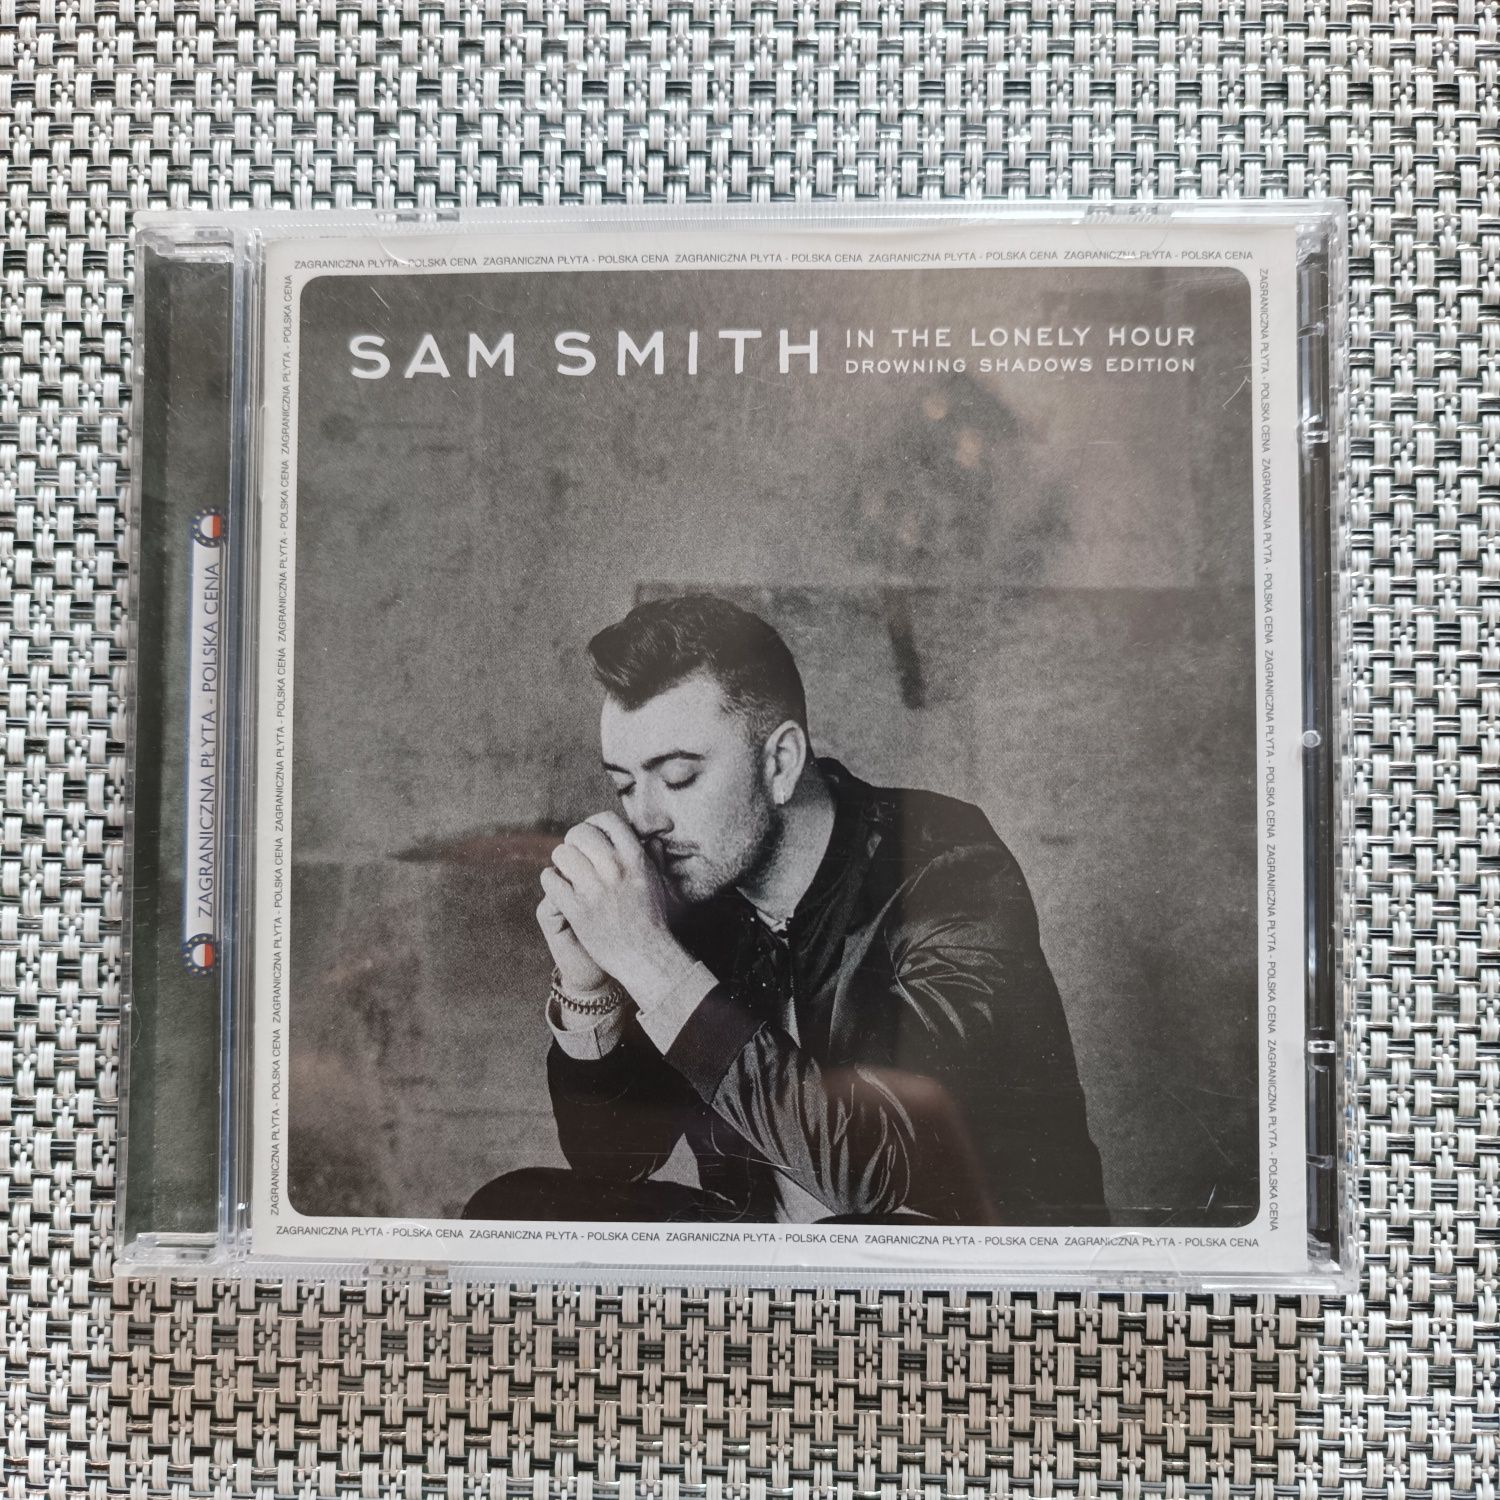 Sam Smith - In The Lonely Hour (Drowning Shadows Edition) 2x CD